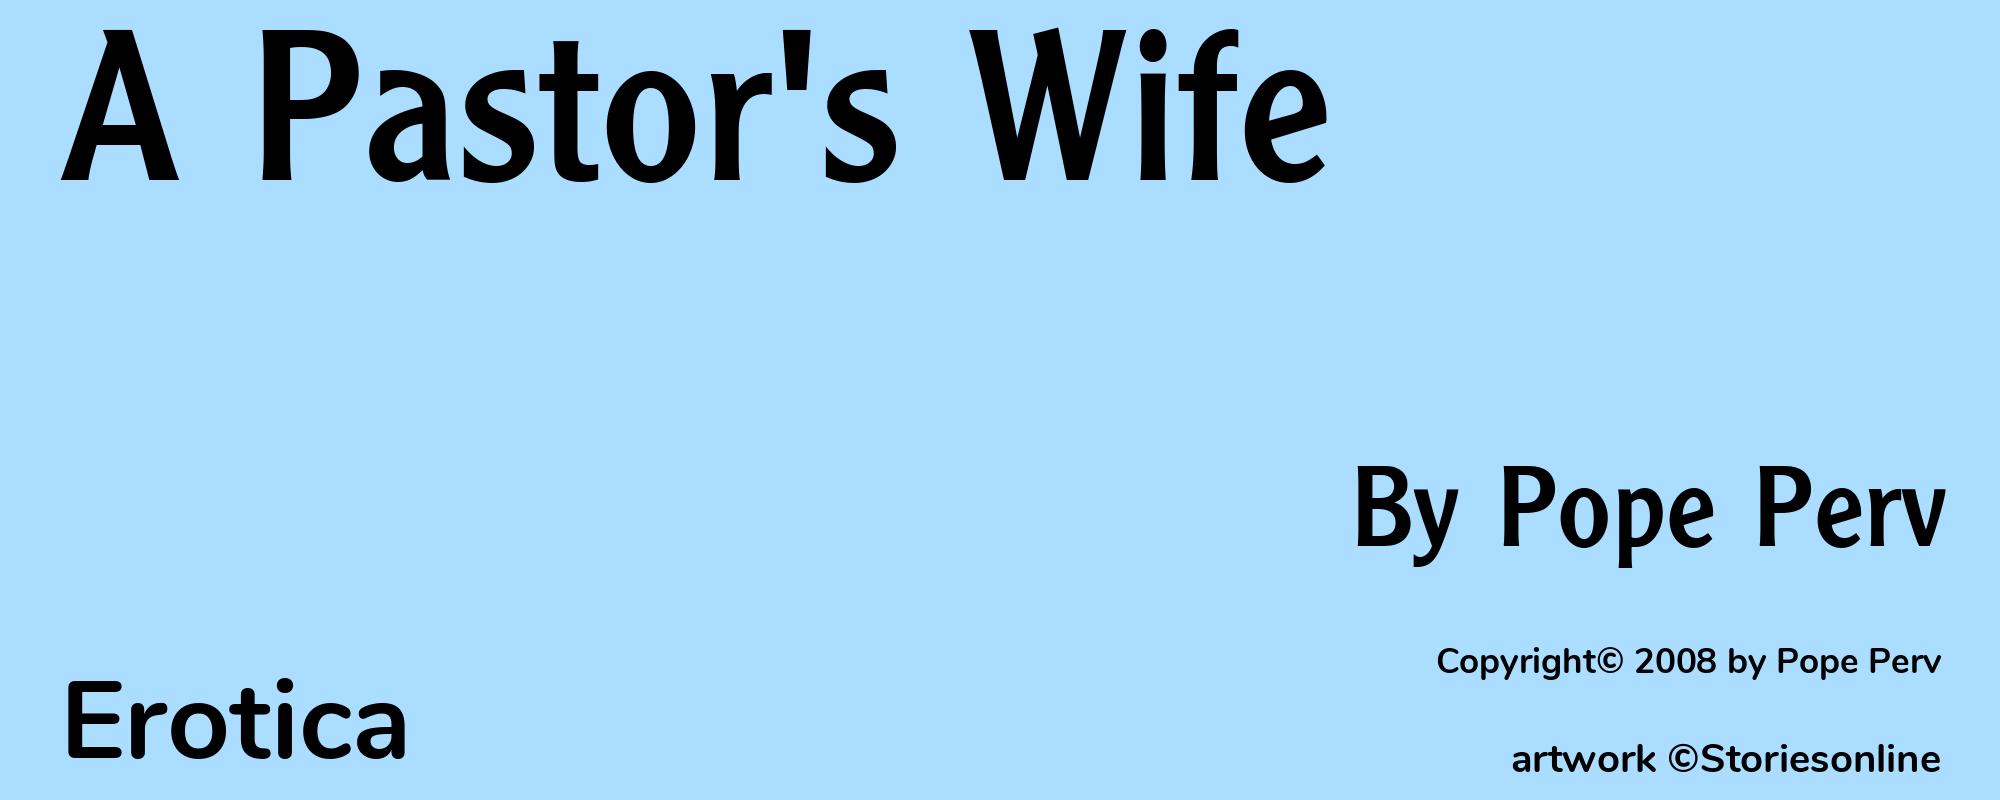 A Pastor's Wife - Cover